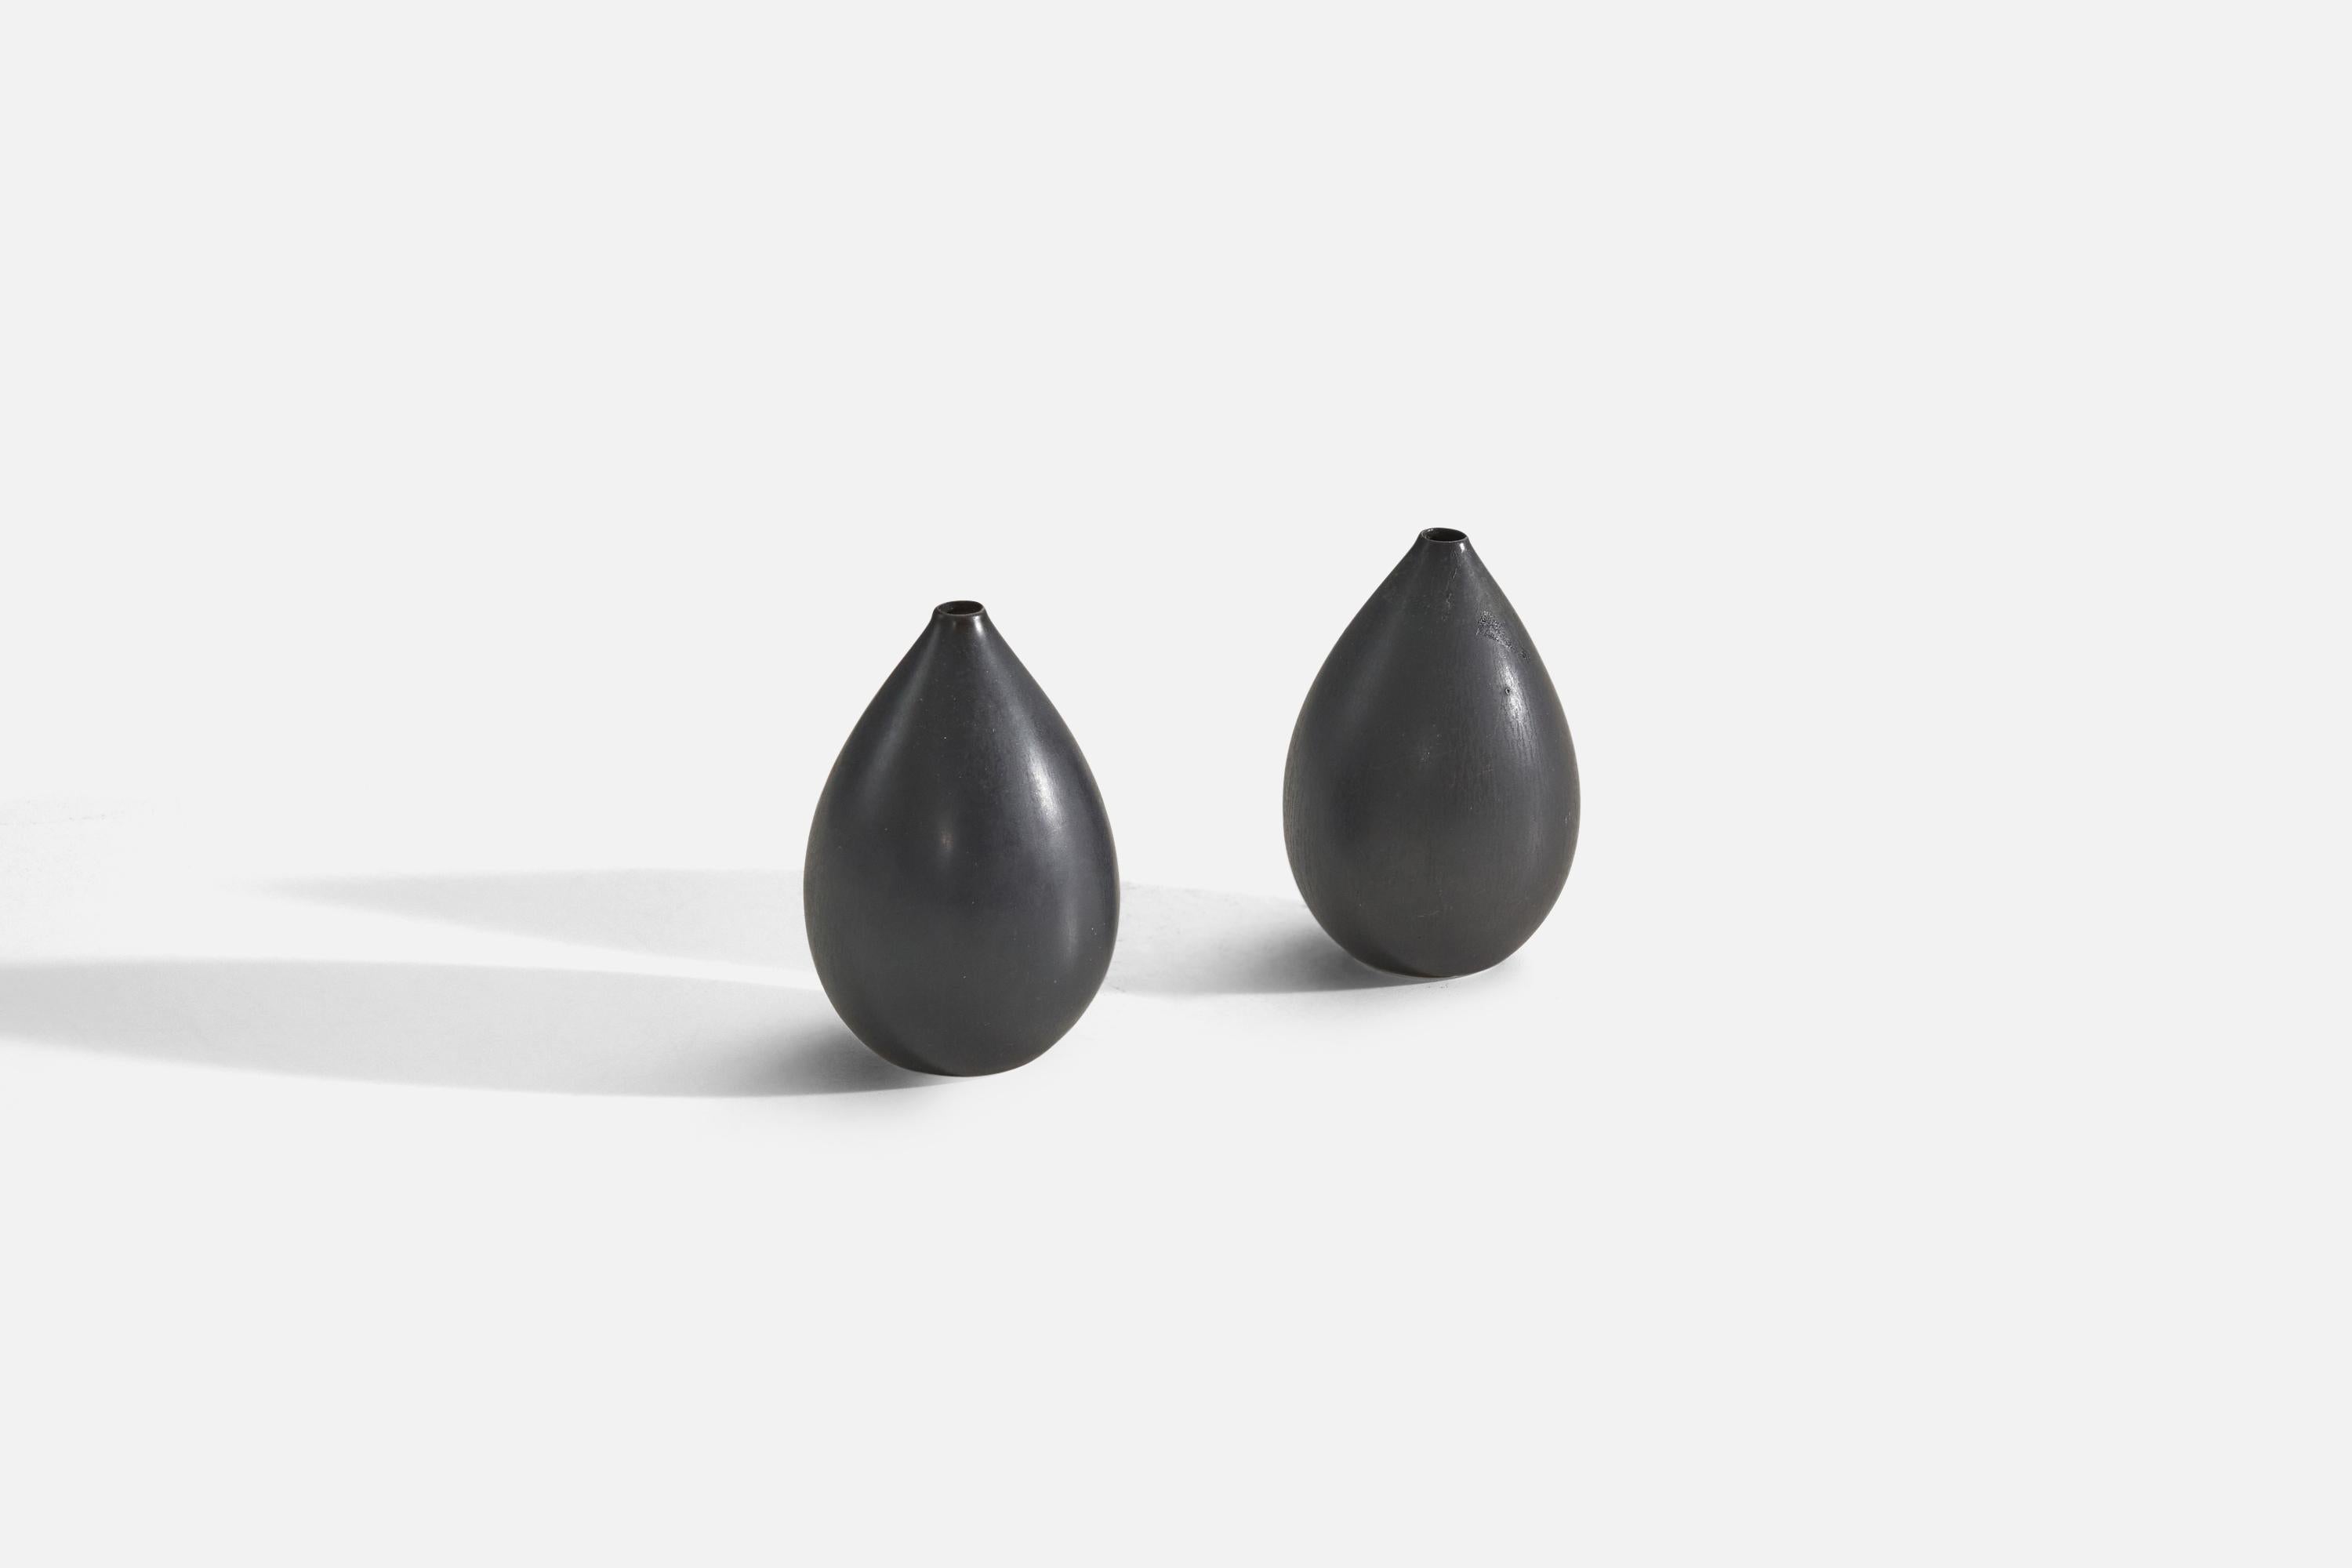 A pair of black-glazed stoneware vases designed by Carl-Harry Stålhane and produced by Rörstrand, Sweden, 1960s.